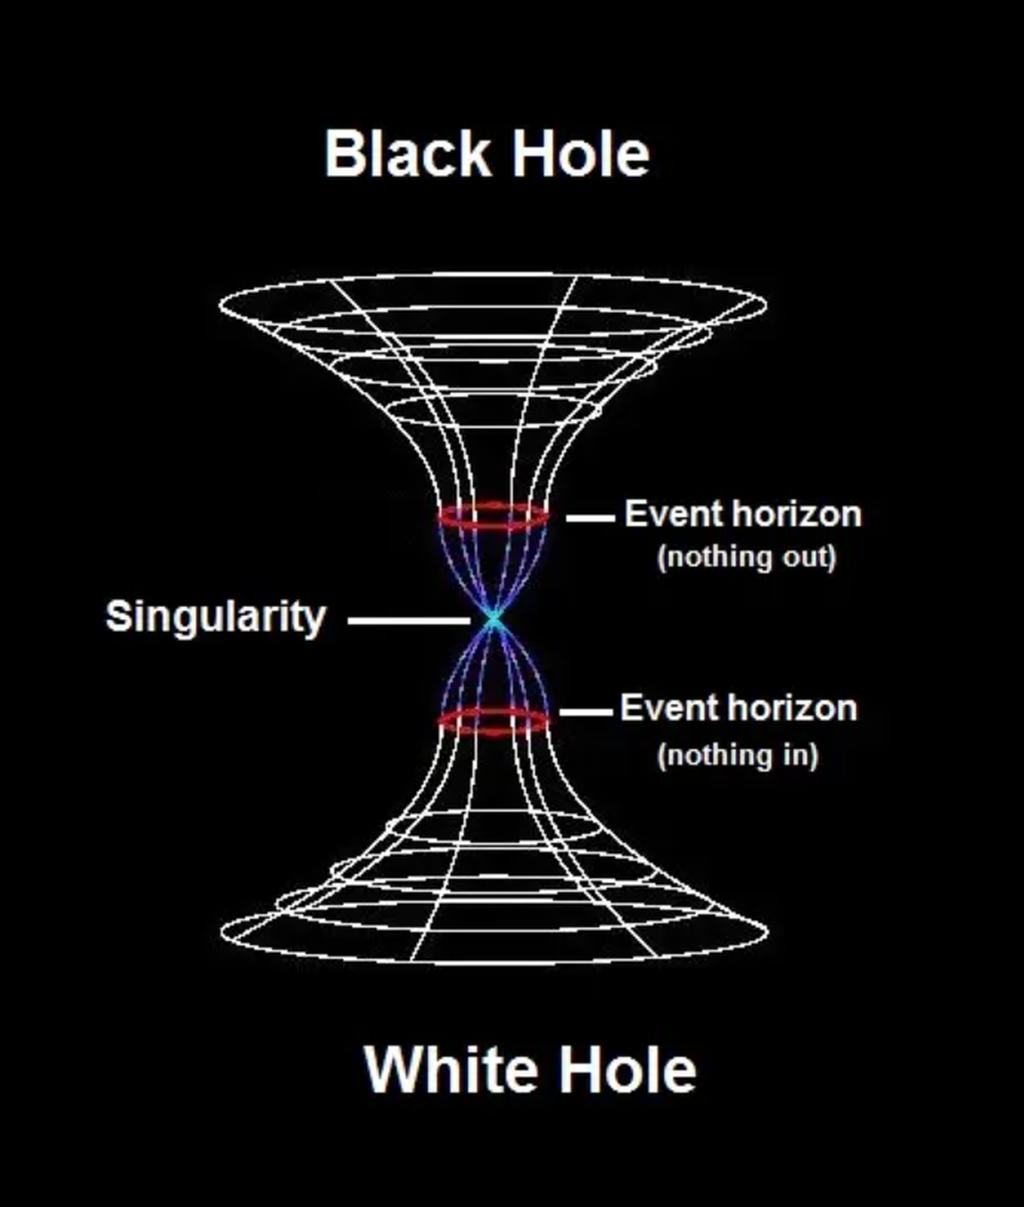 A diagram explaining the differences between twin objects of a black hole (<i>black hole</i>) and a white hole (<i>white hole</i>). Black holes have been proven to exist, but white holes are believed to be impossible. The processes inside the white hole and black hole are reversed.